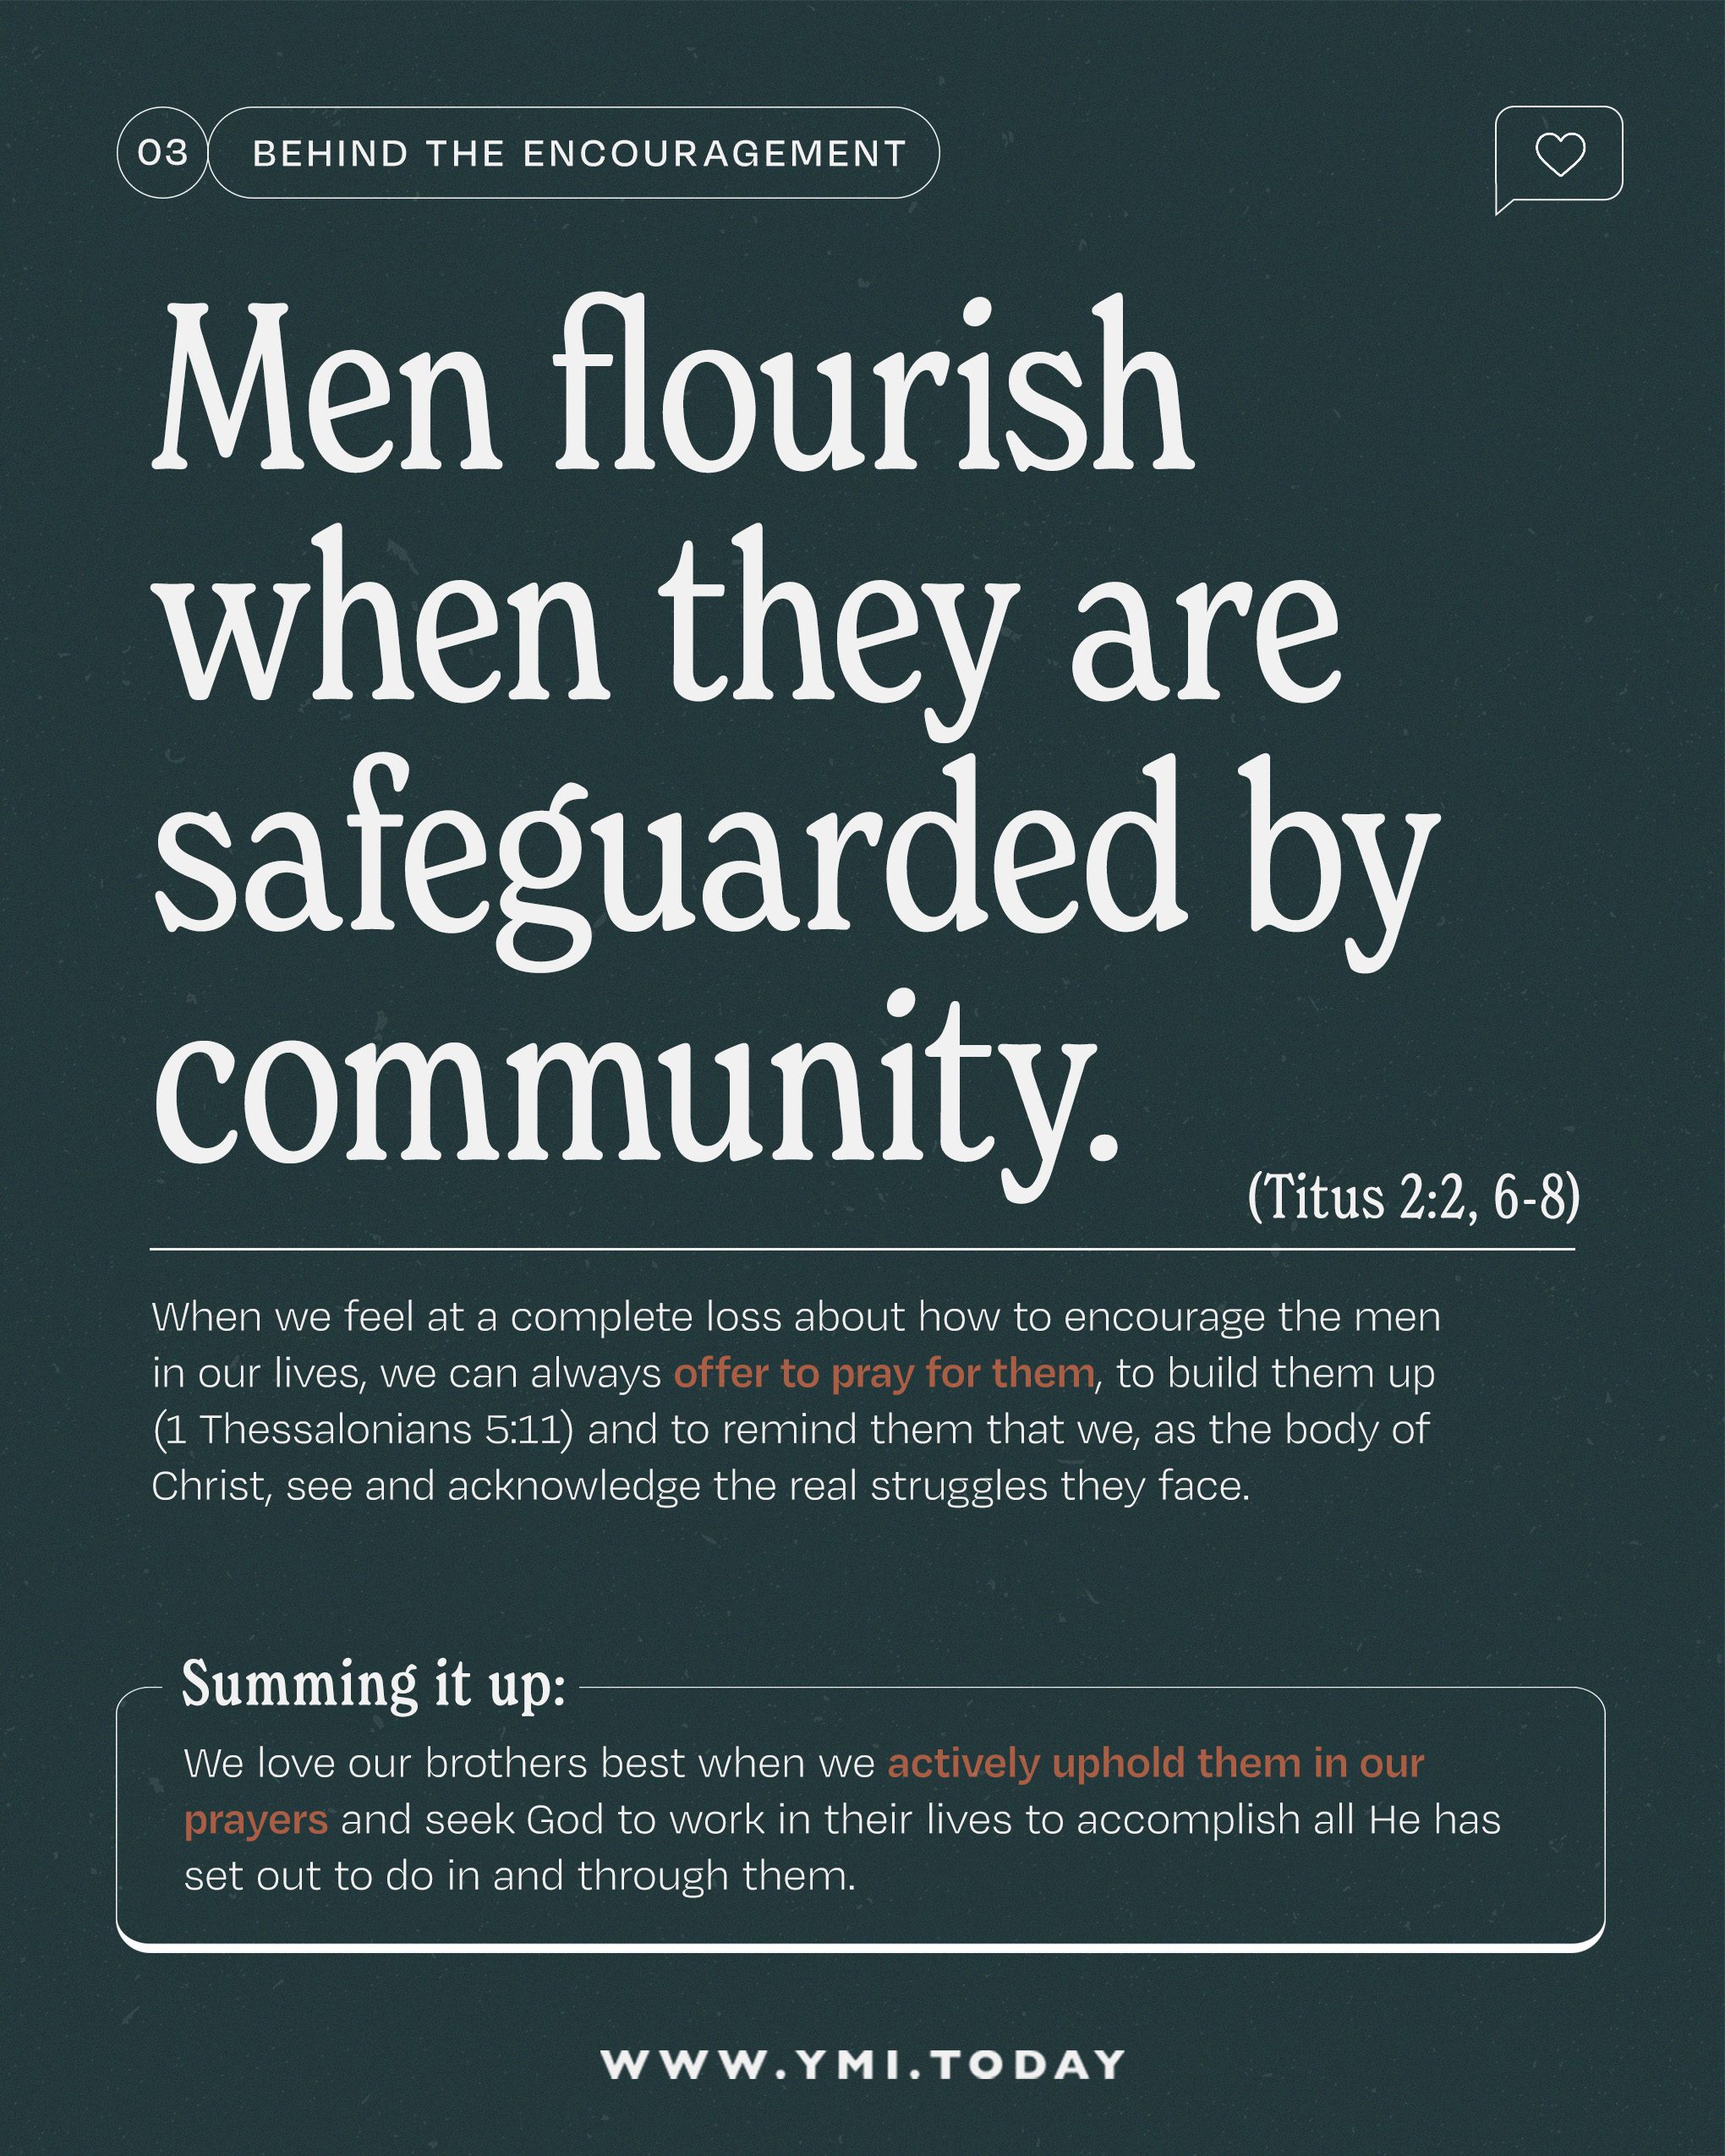 Men flourish when they are safeguarded by community.